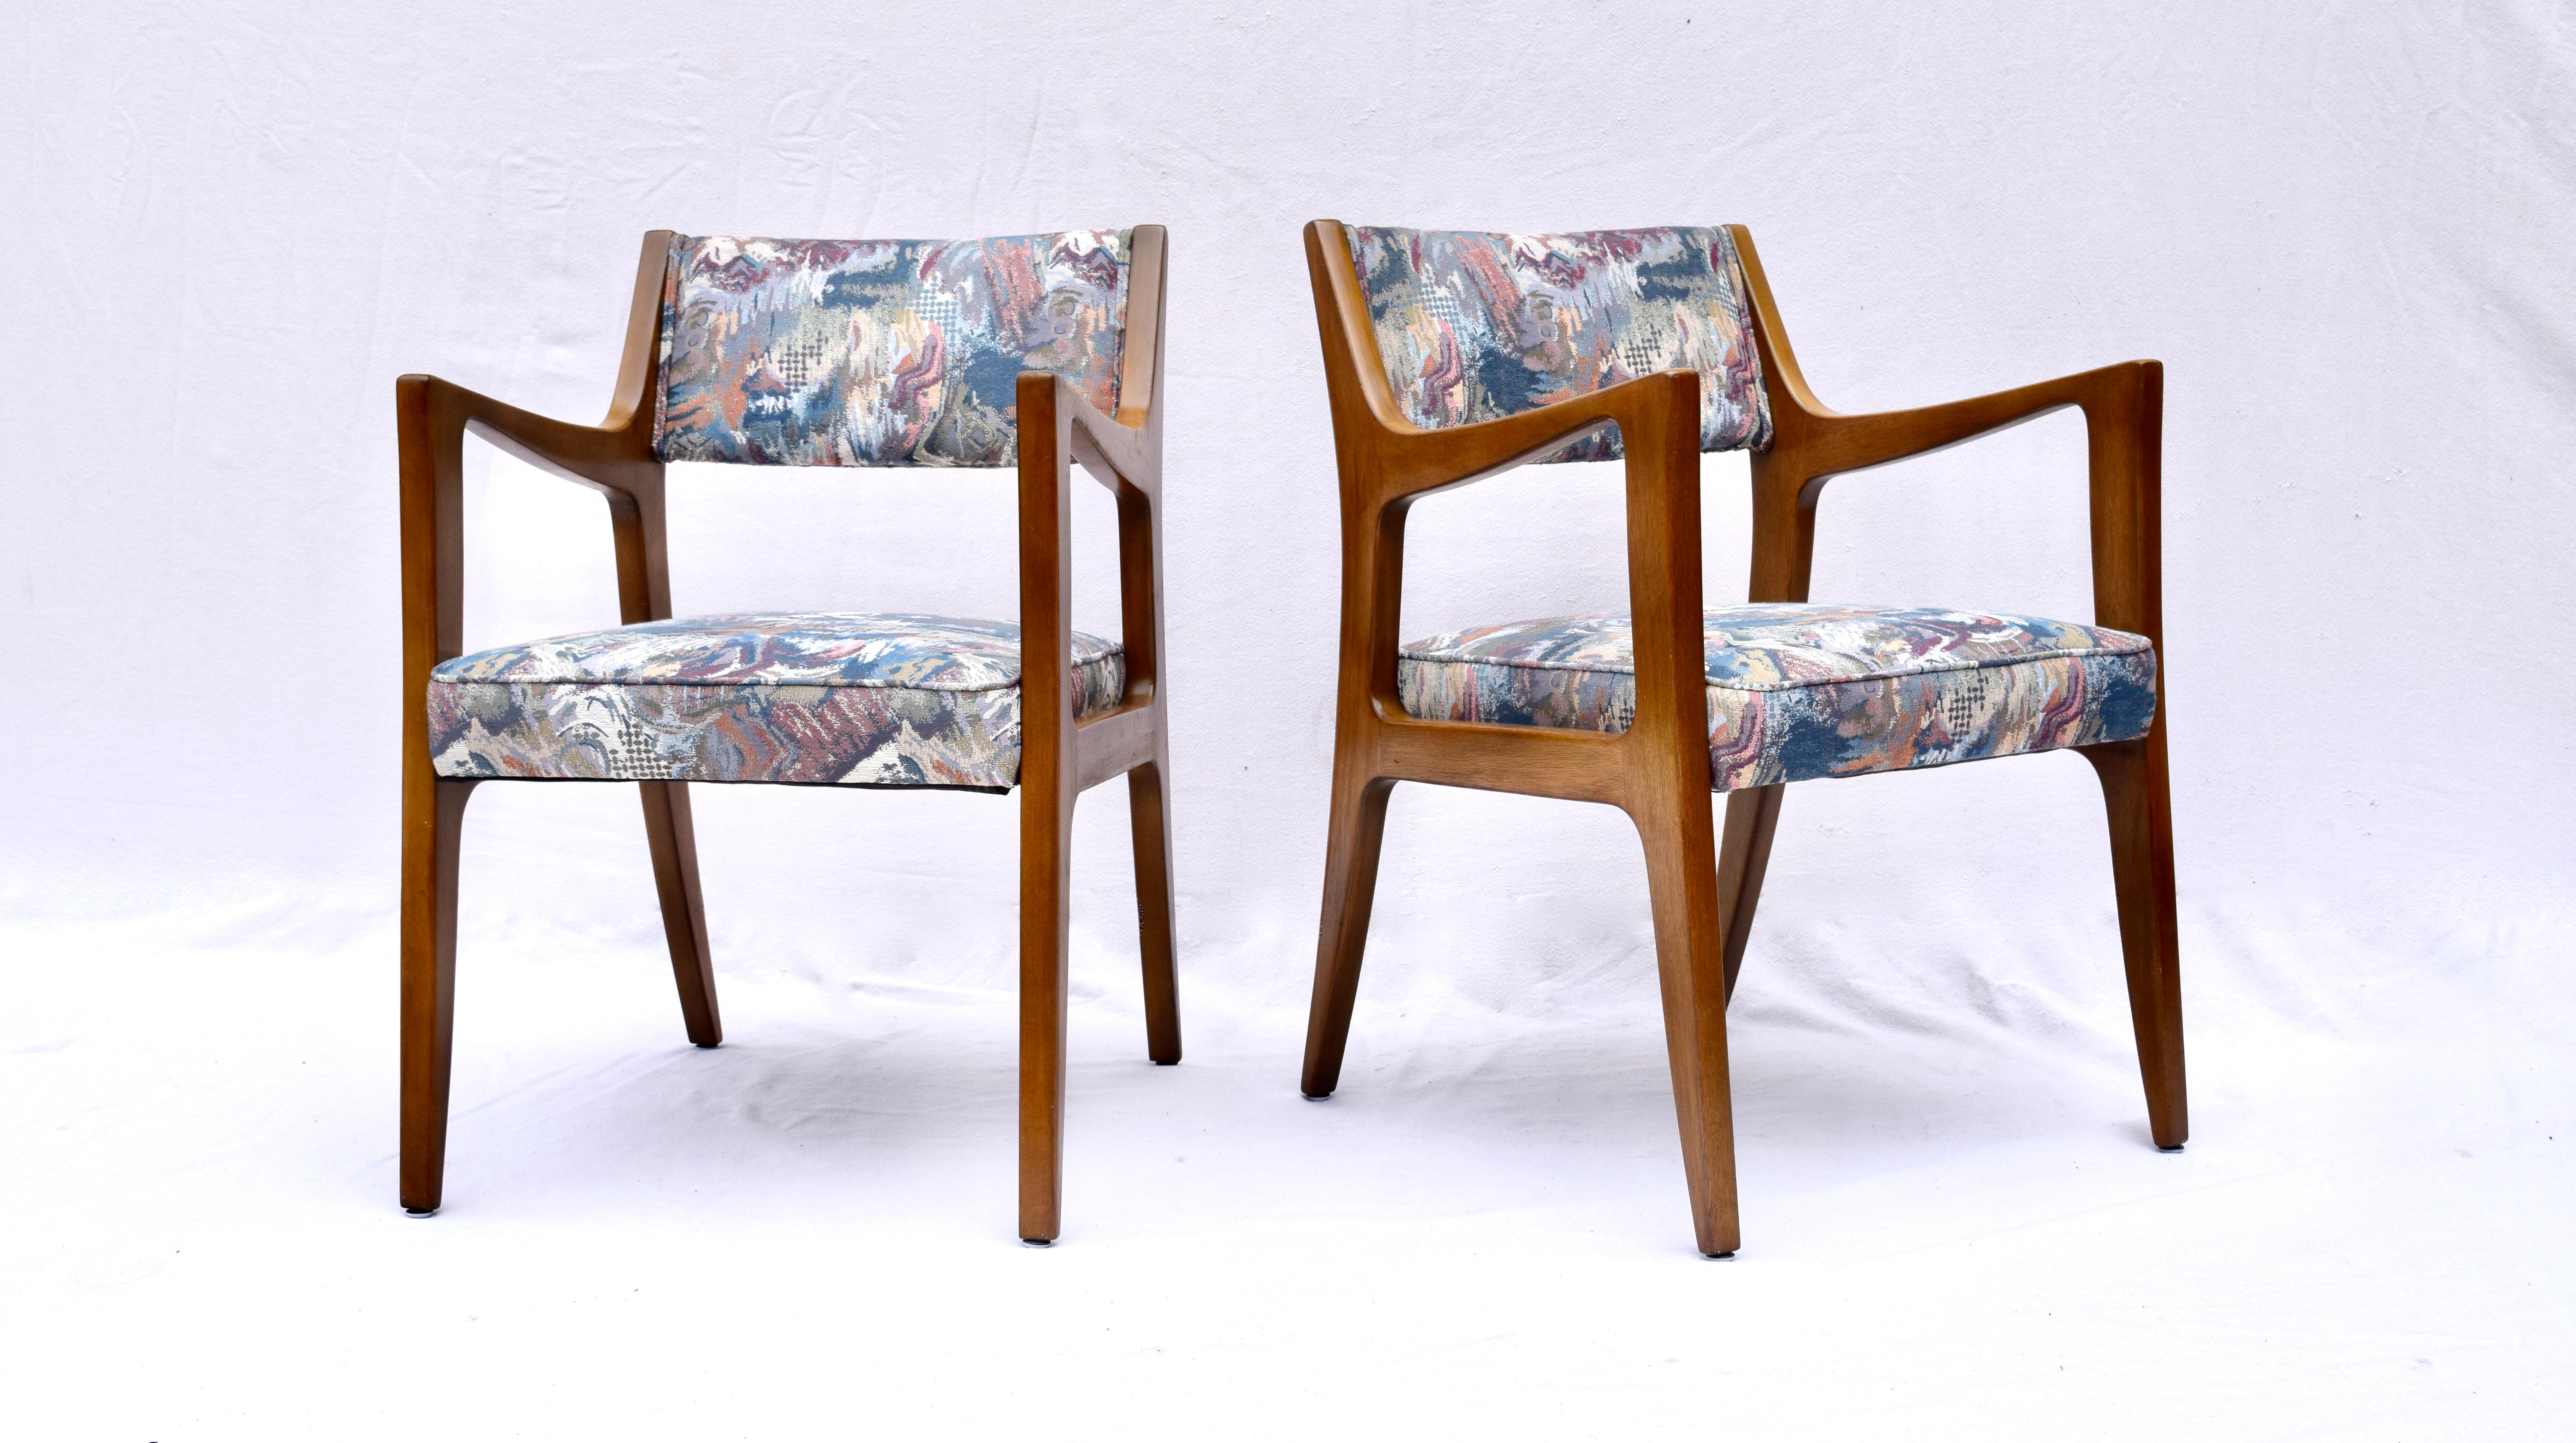 Set of Four Harvey Probber Mahogany Dining Chairs, 1950s fully restored with beautifully maintained original finish.
